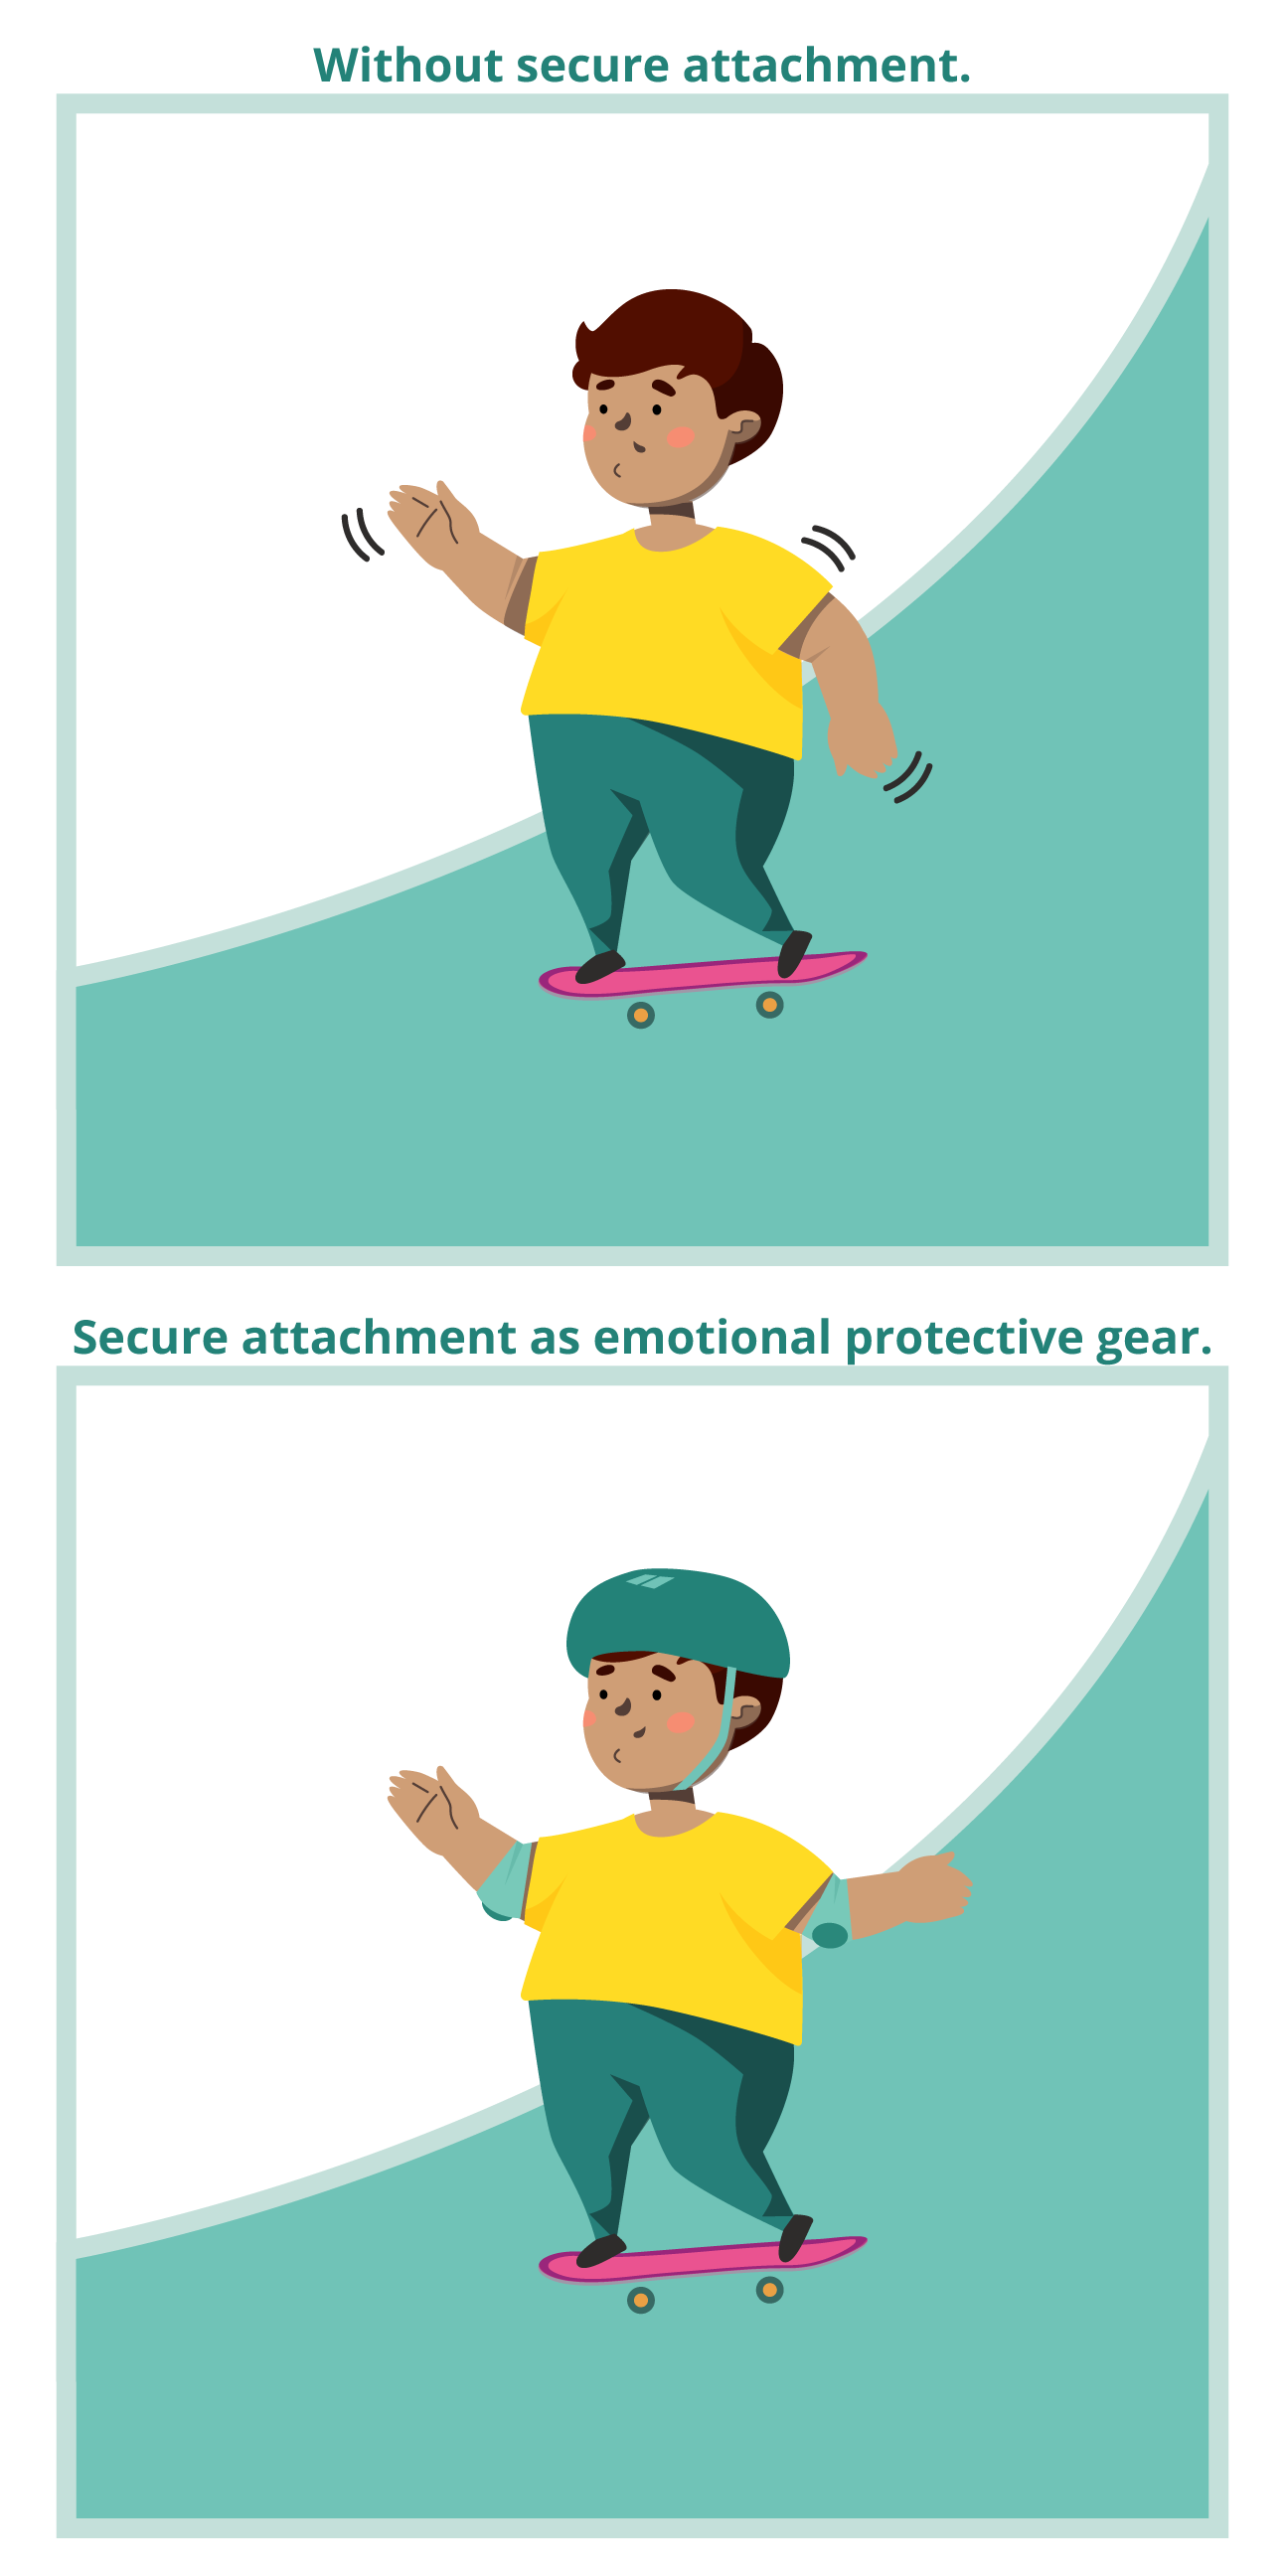 Secure attachment as emotional protective gear